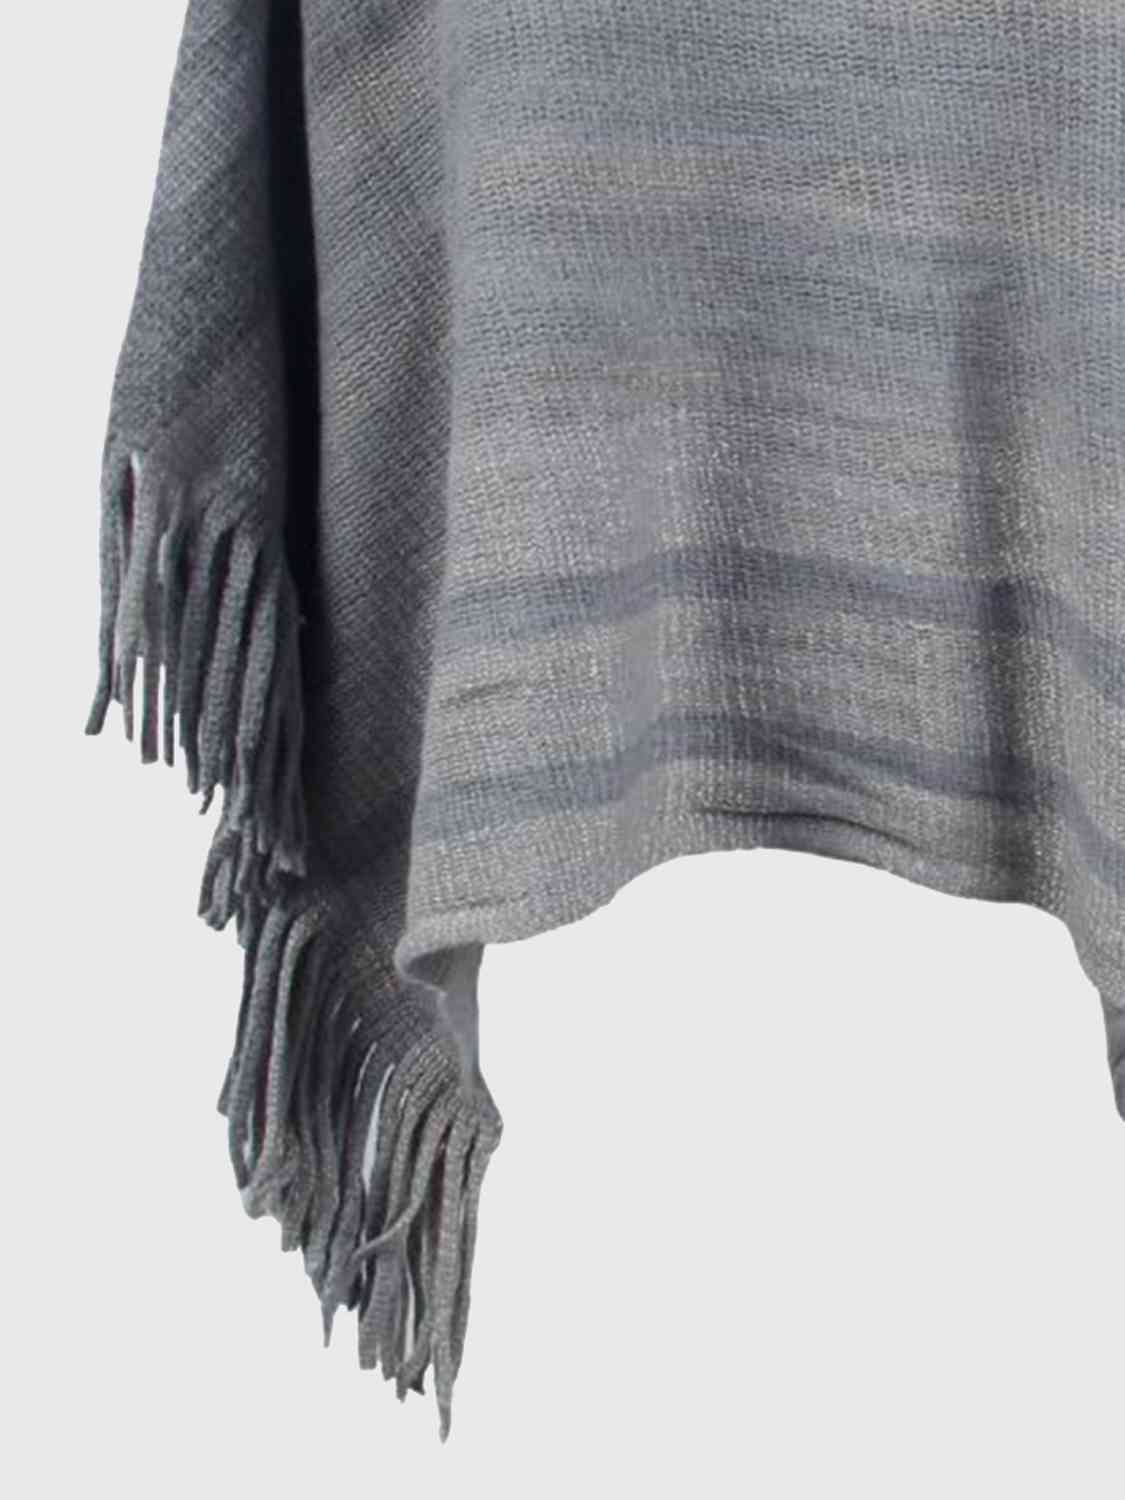 Striped Boat Neck Poncho with Fringes Print on any thing USA/STOD clothes